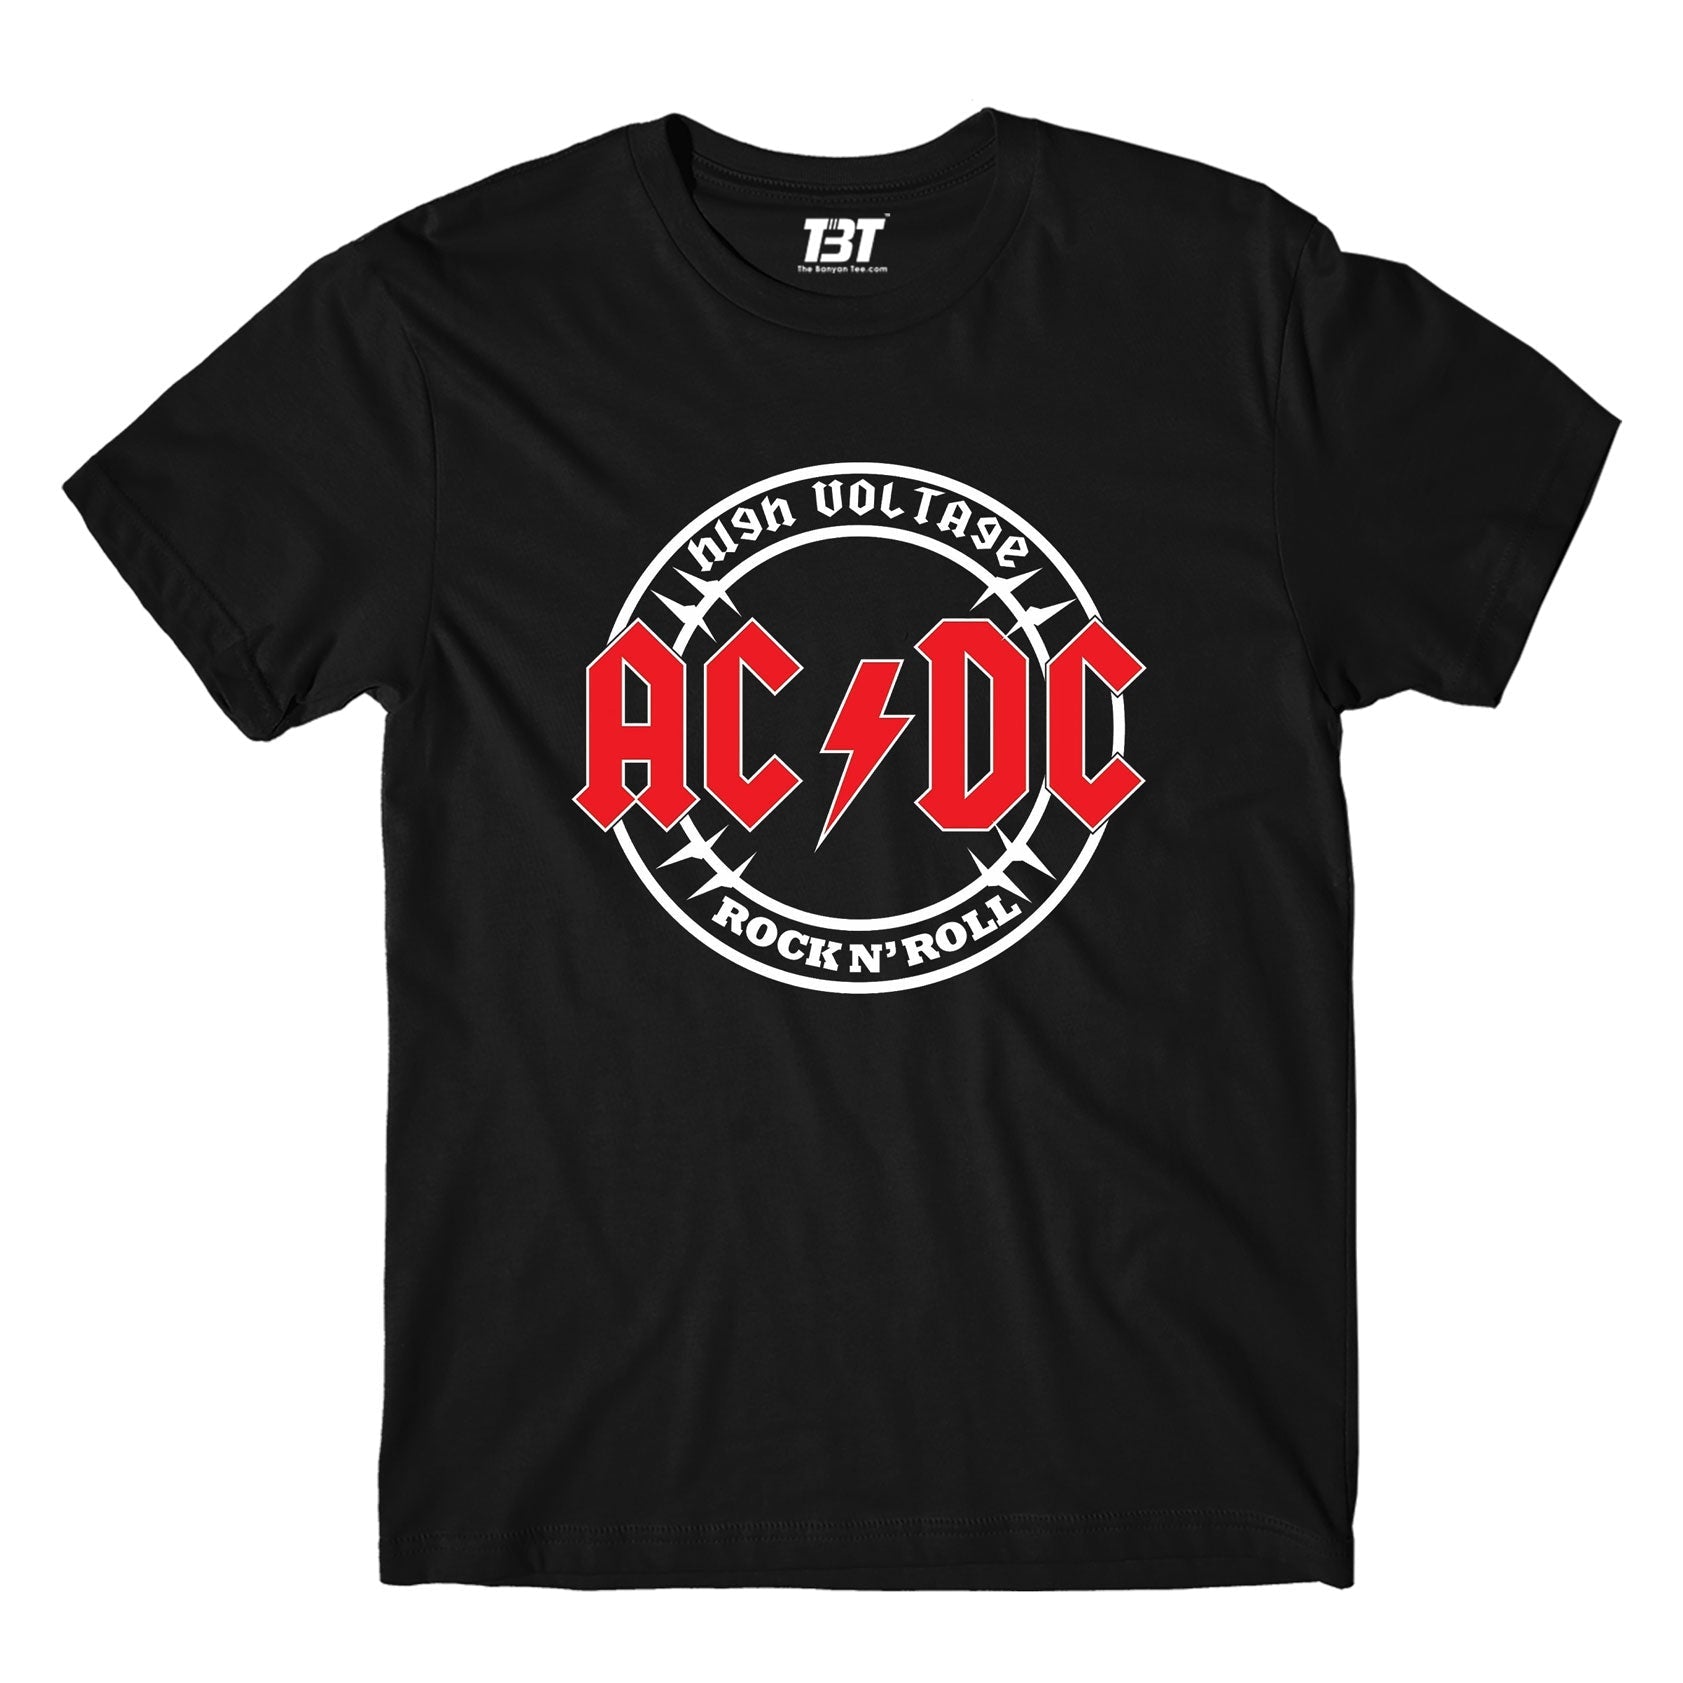 the banyan tee merch on sale AC/DC T shirt - On Sale - 6XL (Chest size 56 IN)